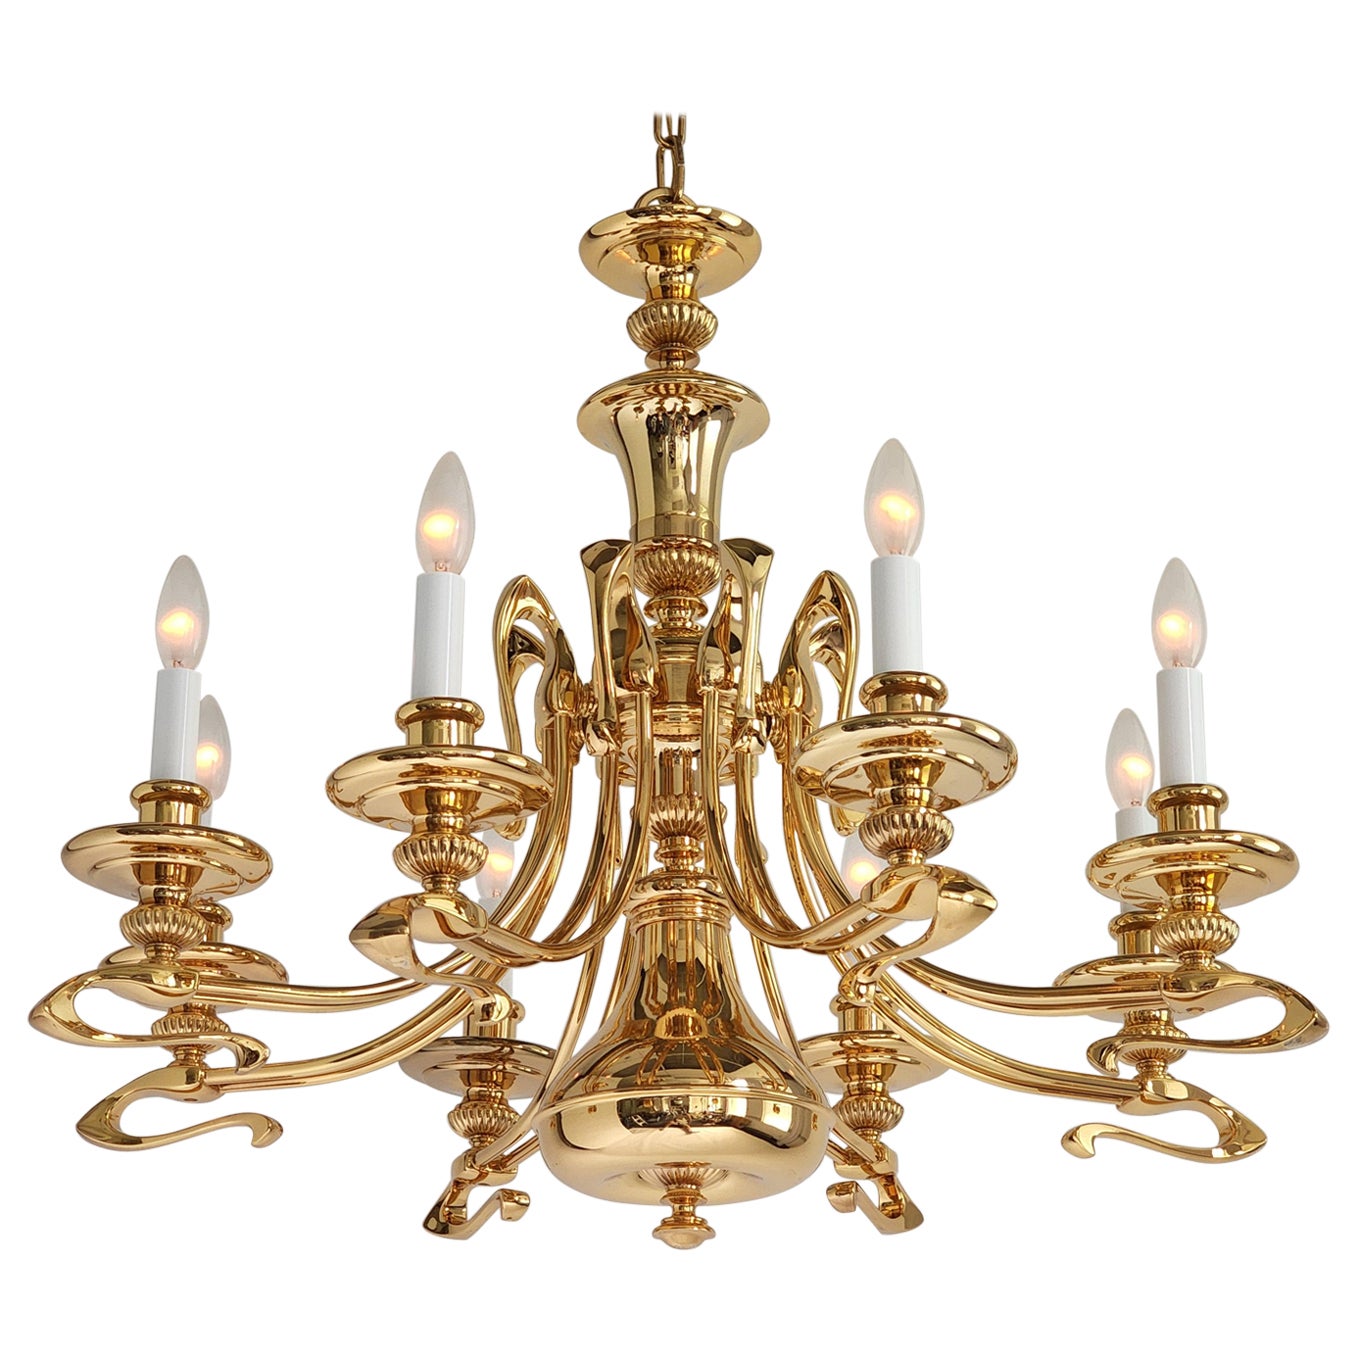 1980s Massive Art Nouveau Style Gold Plated Chandelier, Italy